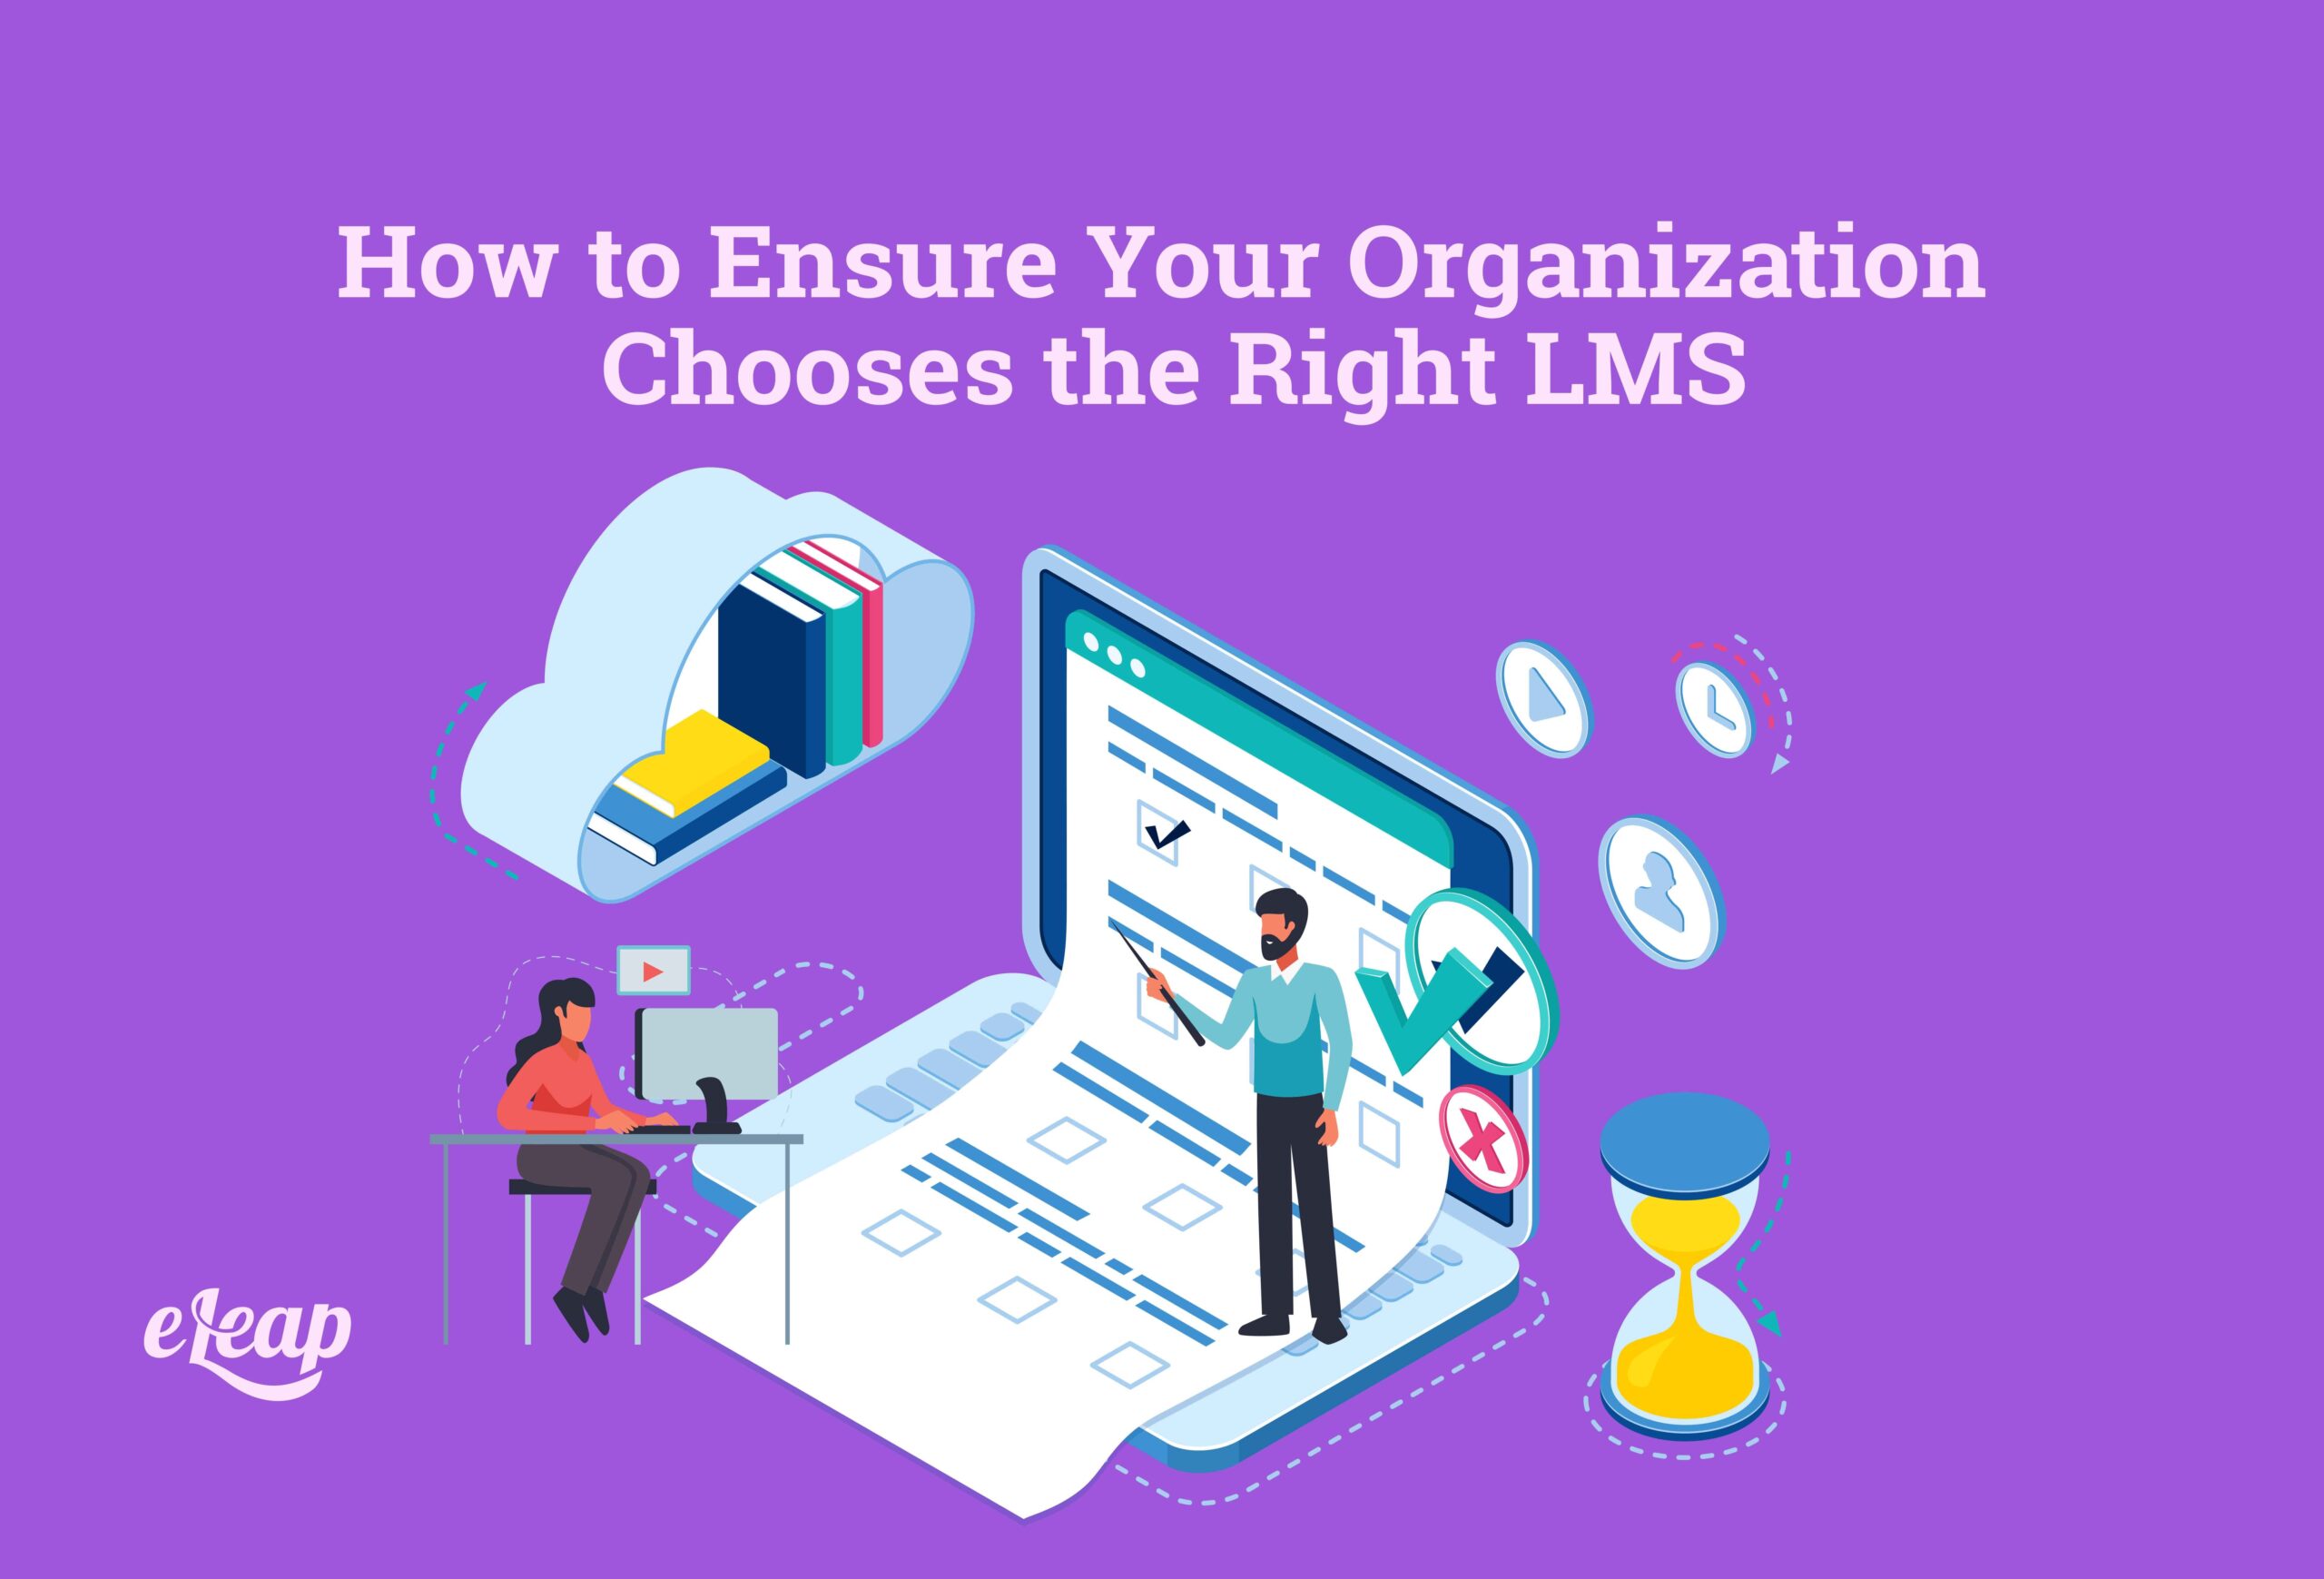 How to Ensure Your Organization Chooses the Right LMS